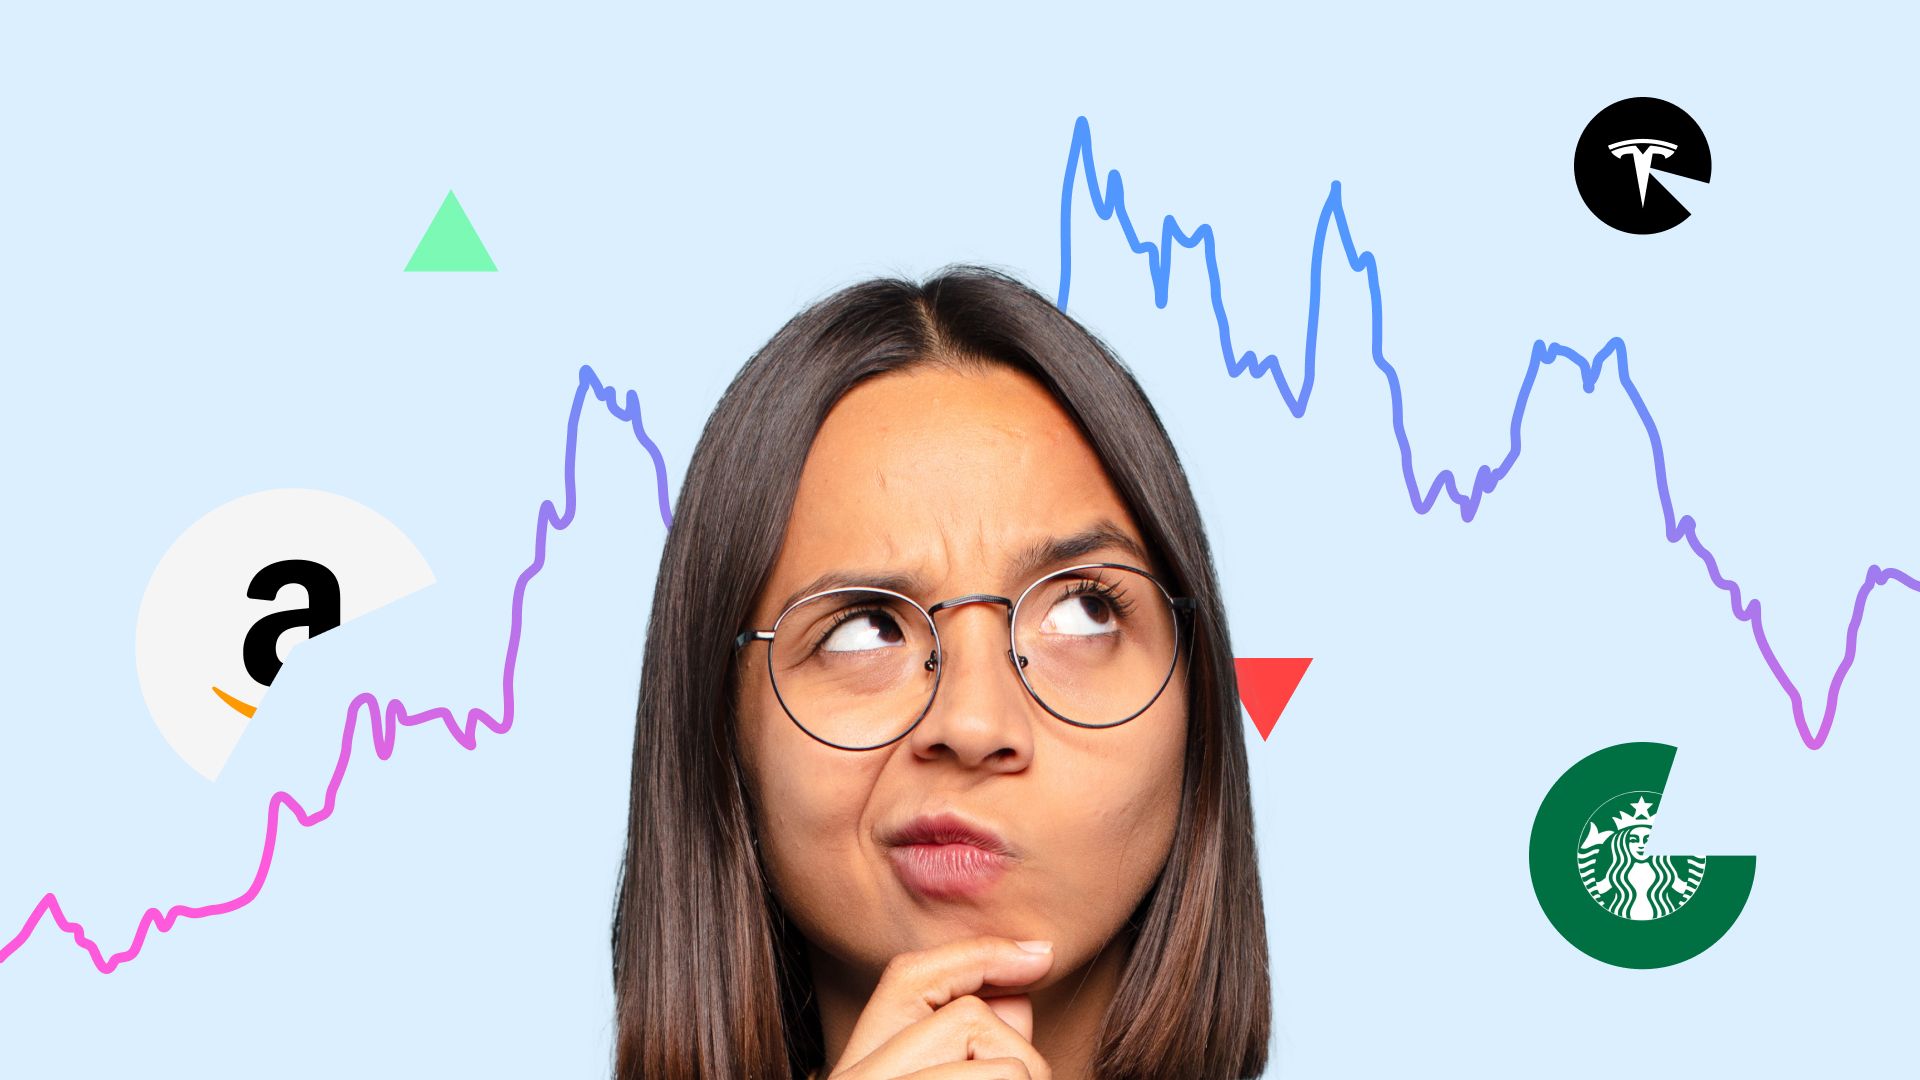 Image of a woman's face with a graph line behind her and Amazon, Tesla and Starbucks logos floating in the background.